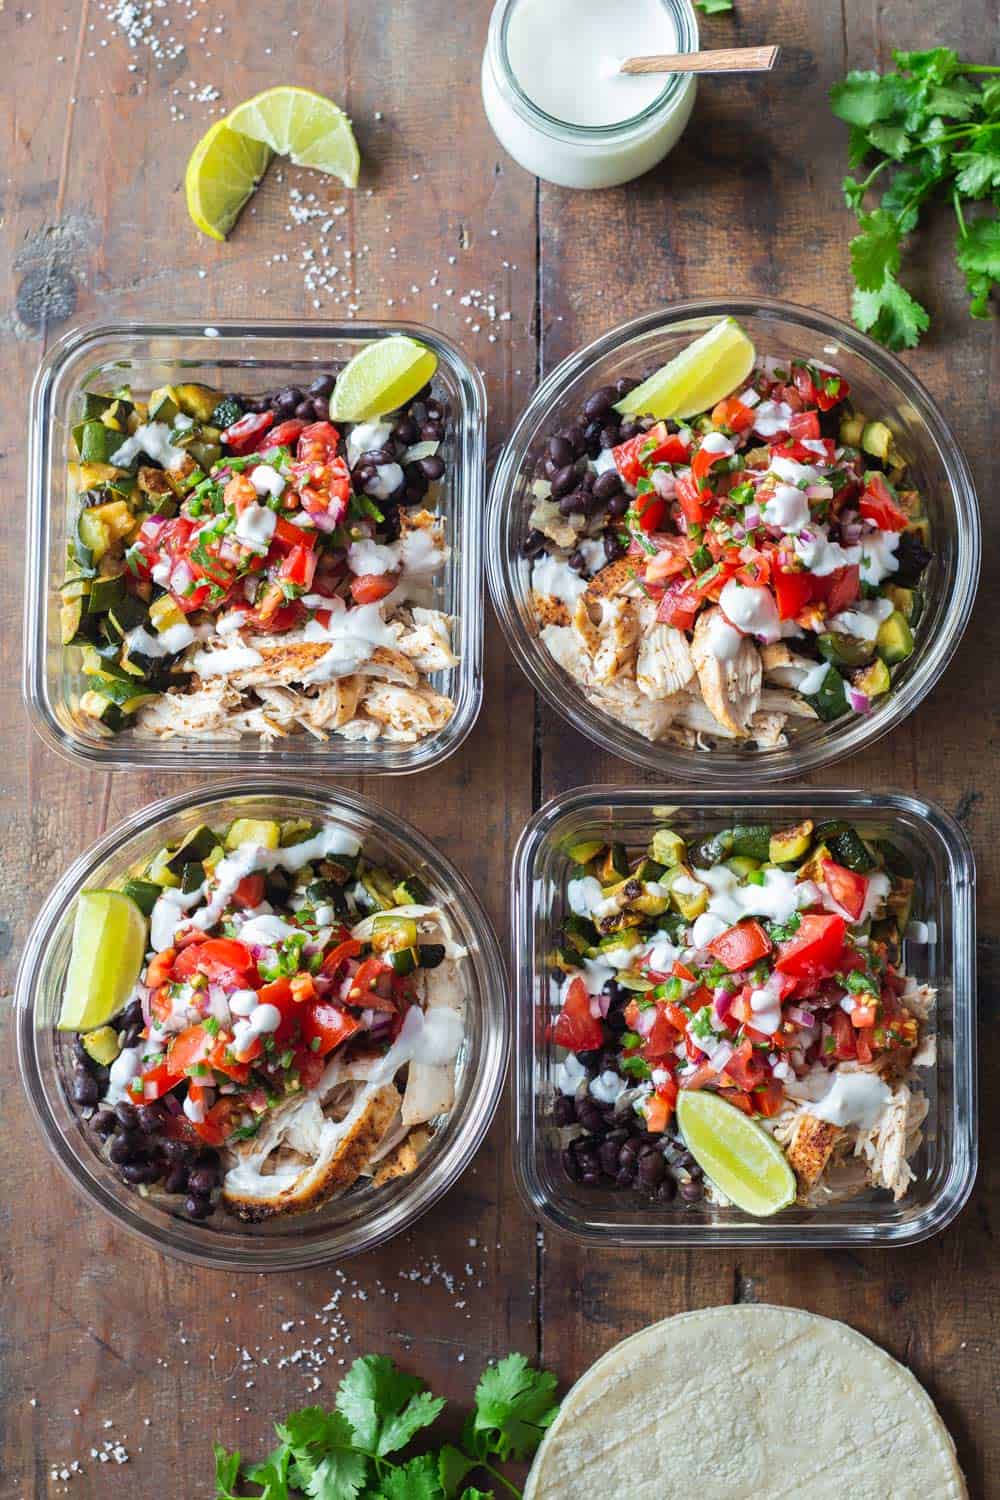 https://greenhealthycooking.com/wp-content/uploads/2018/11/Mexican-Chicken-Meal-Prep-Bowls-Image.jpg